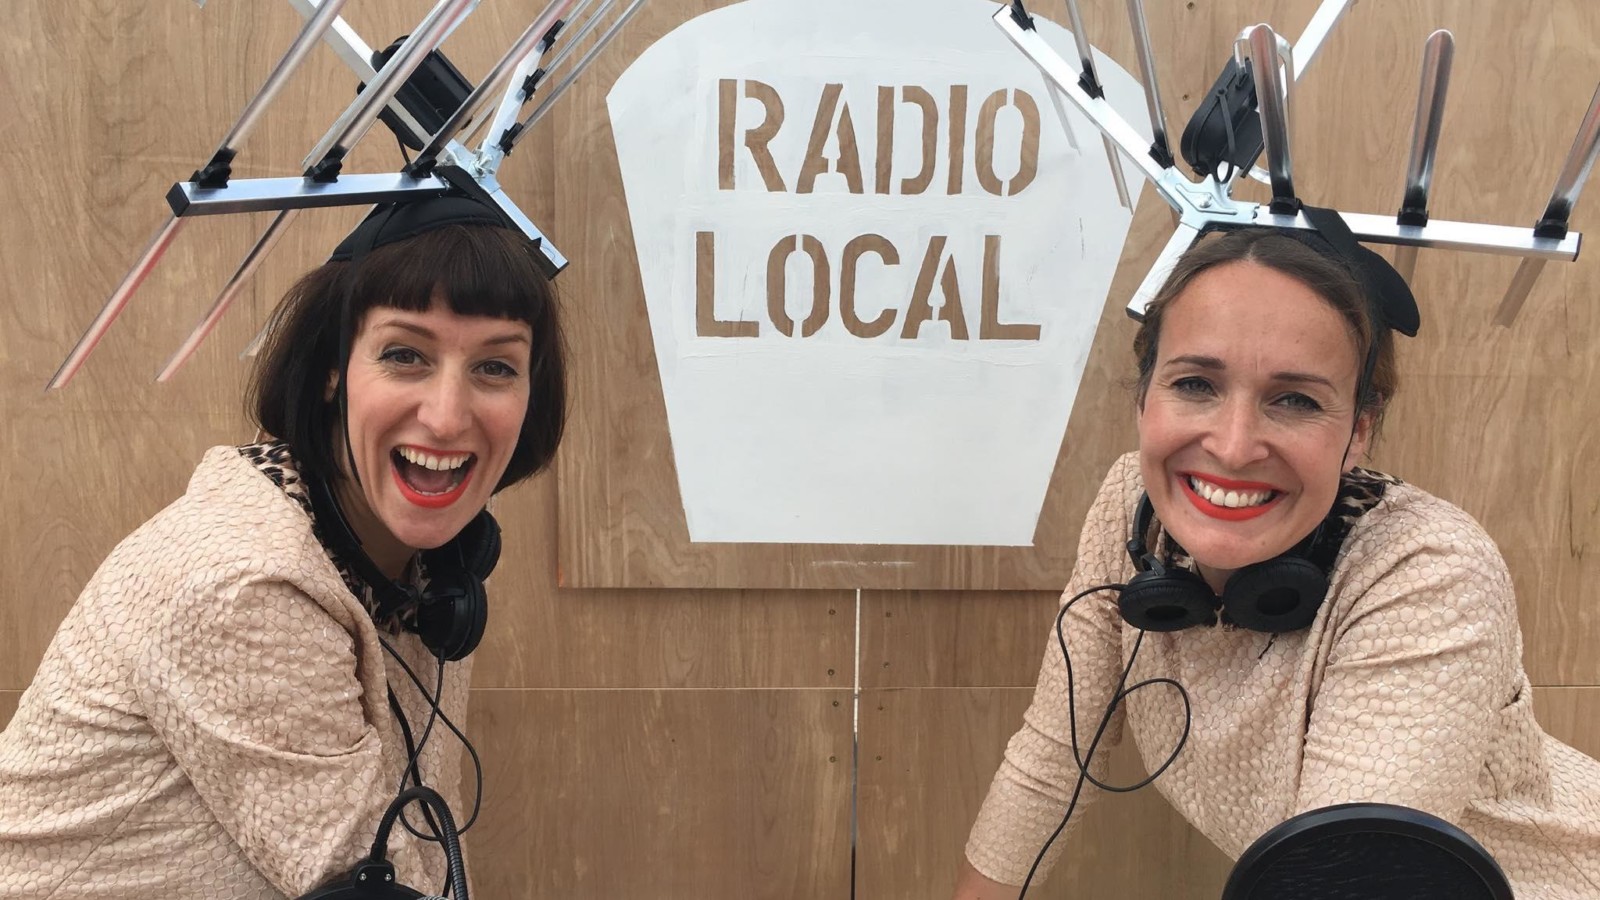 Two women wearing beige dresses, headphones and TV aerials on their heads smile in front of a wooden sign which reads ' Radio Local'